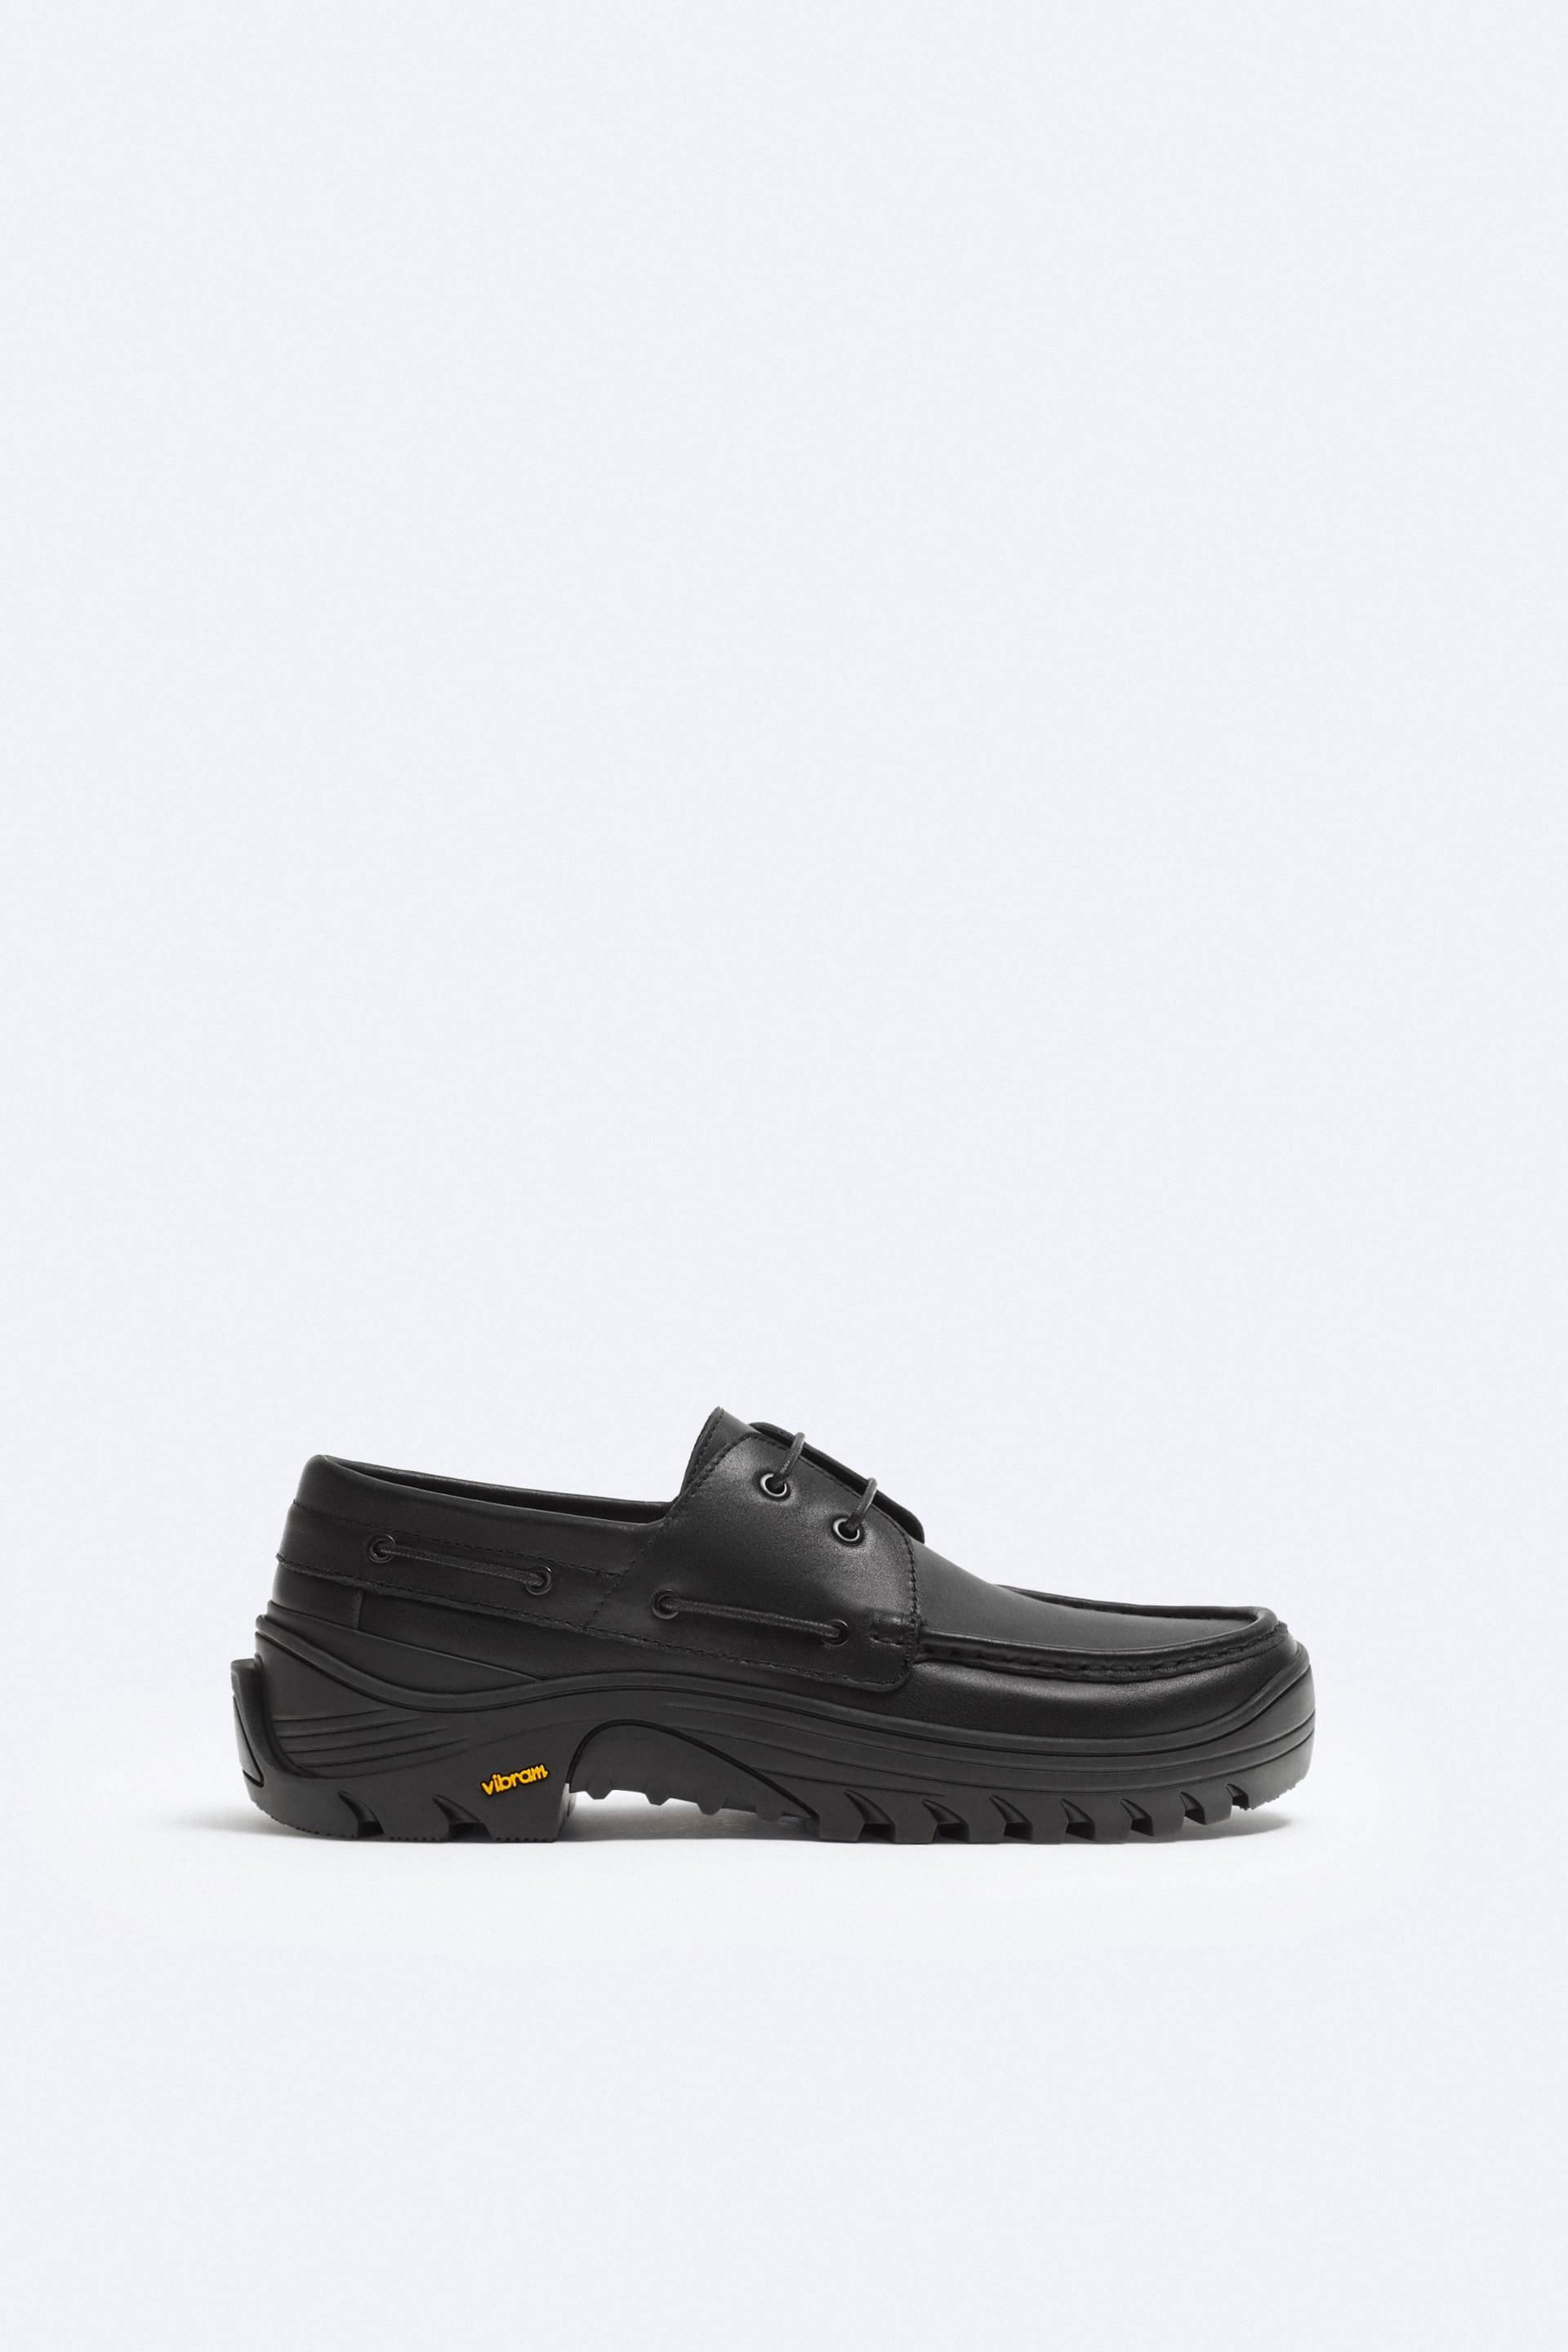 VIBRAM® LEATHER DECK SHOES by ZARA